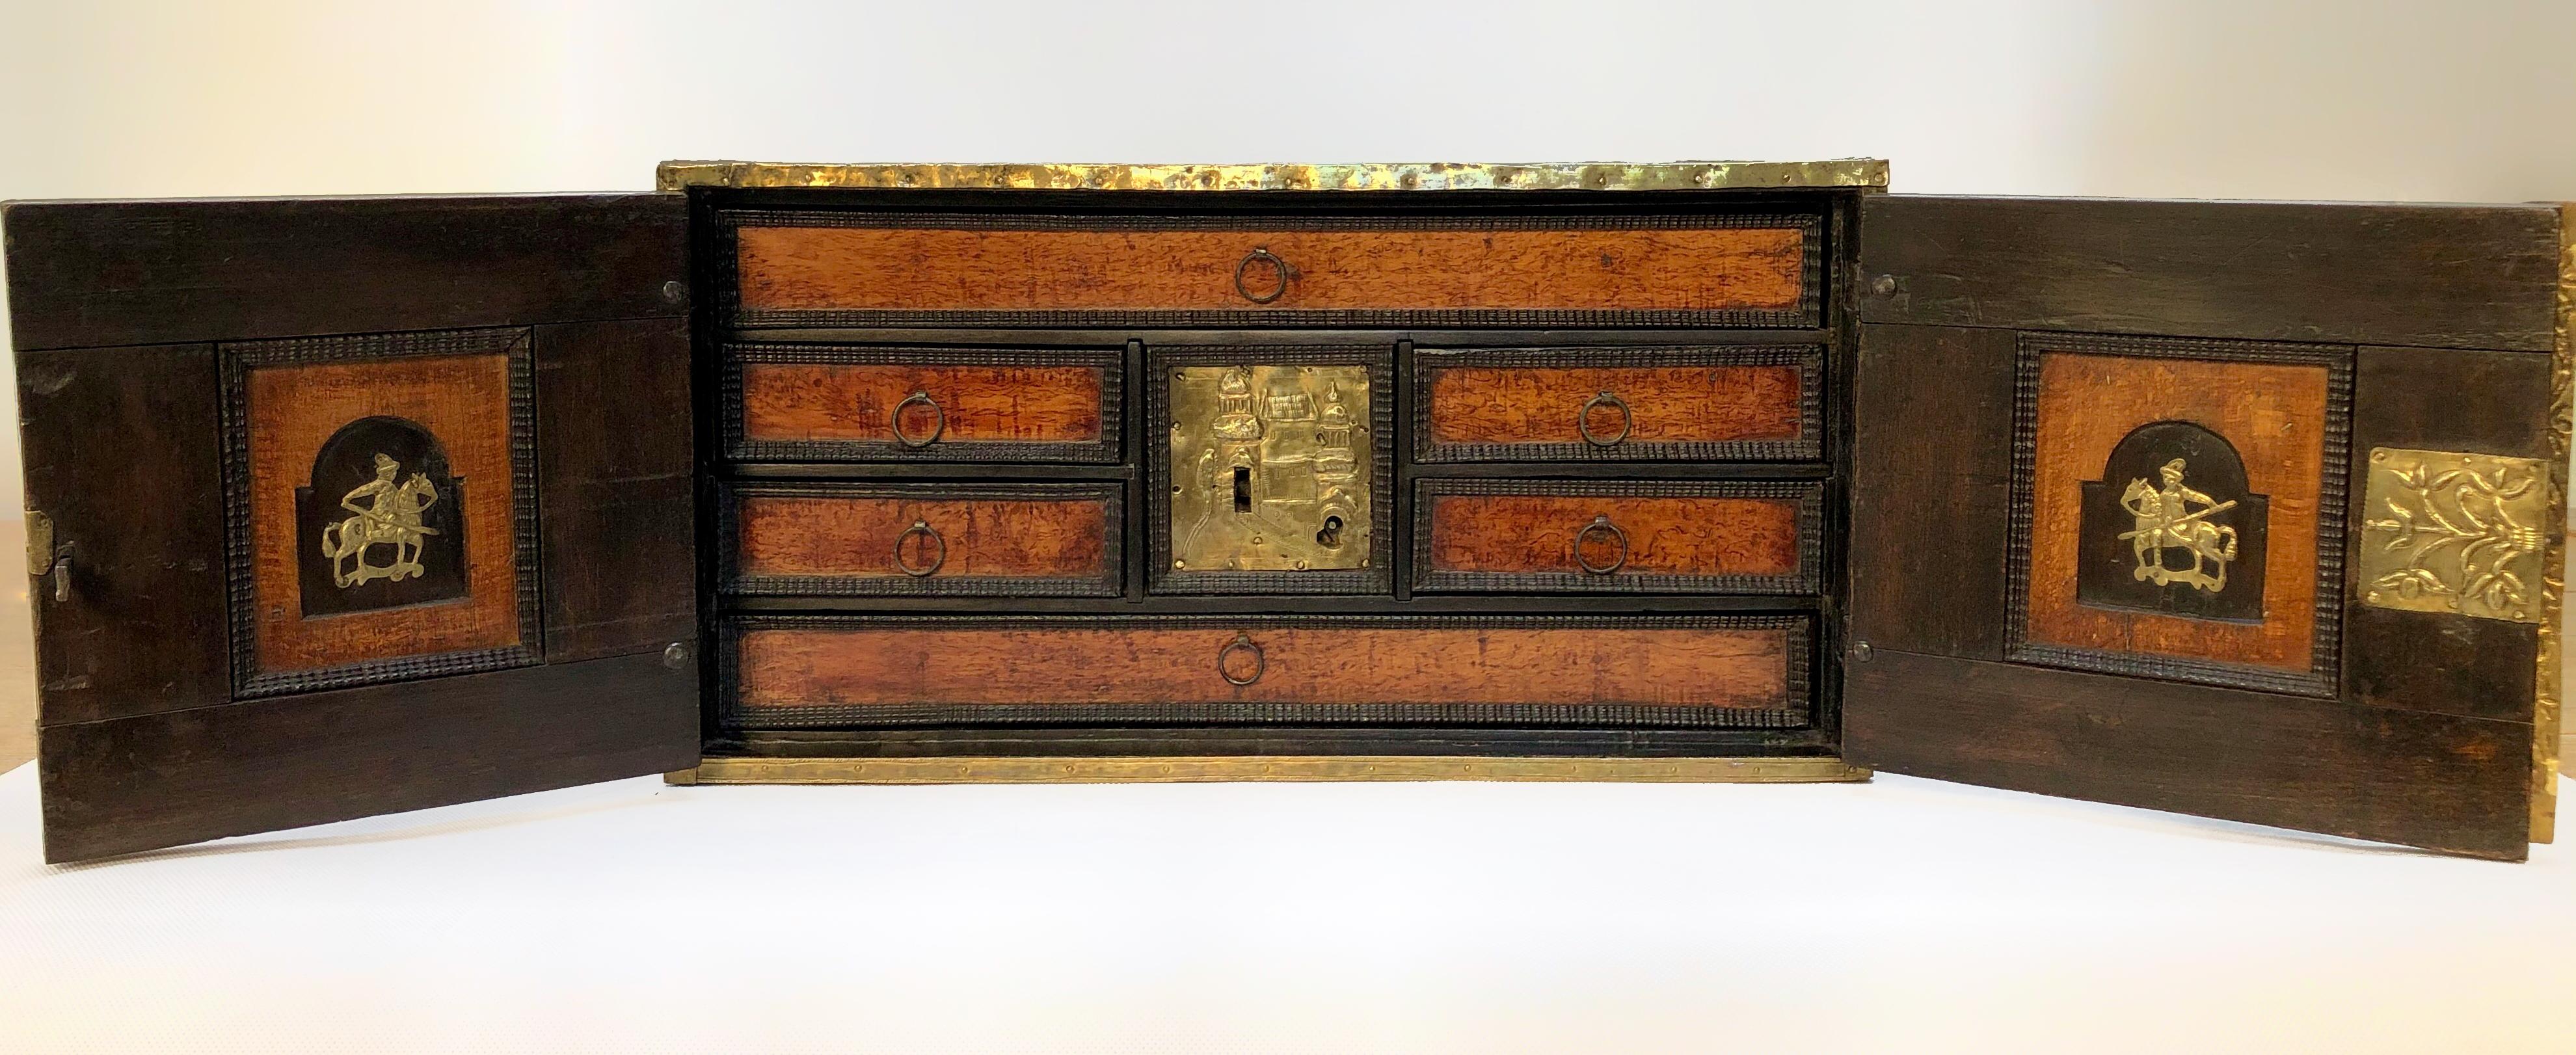 A North European 17th century brass-mounted elm and walnut table cabinet
The pair of doors enclosing a fitted interior of drawers including 'secret' compartments, the central panel decorated with an orientalist brass panel depicting domed